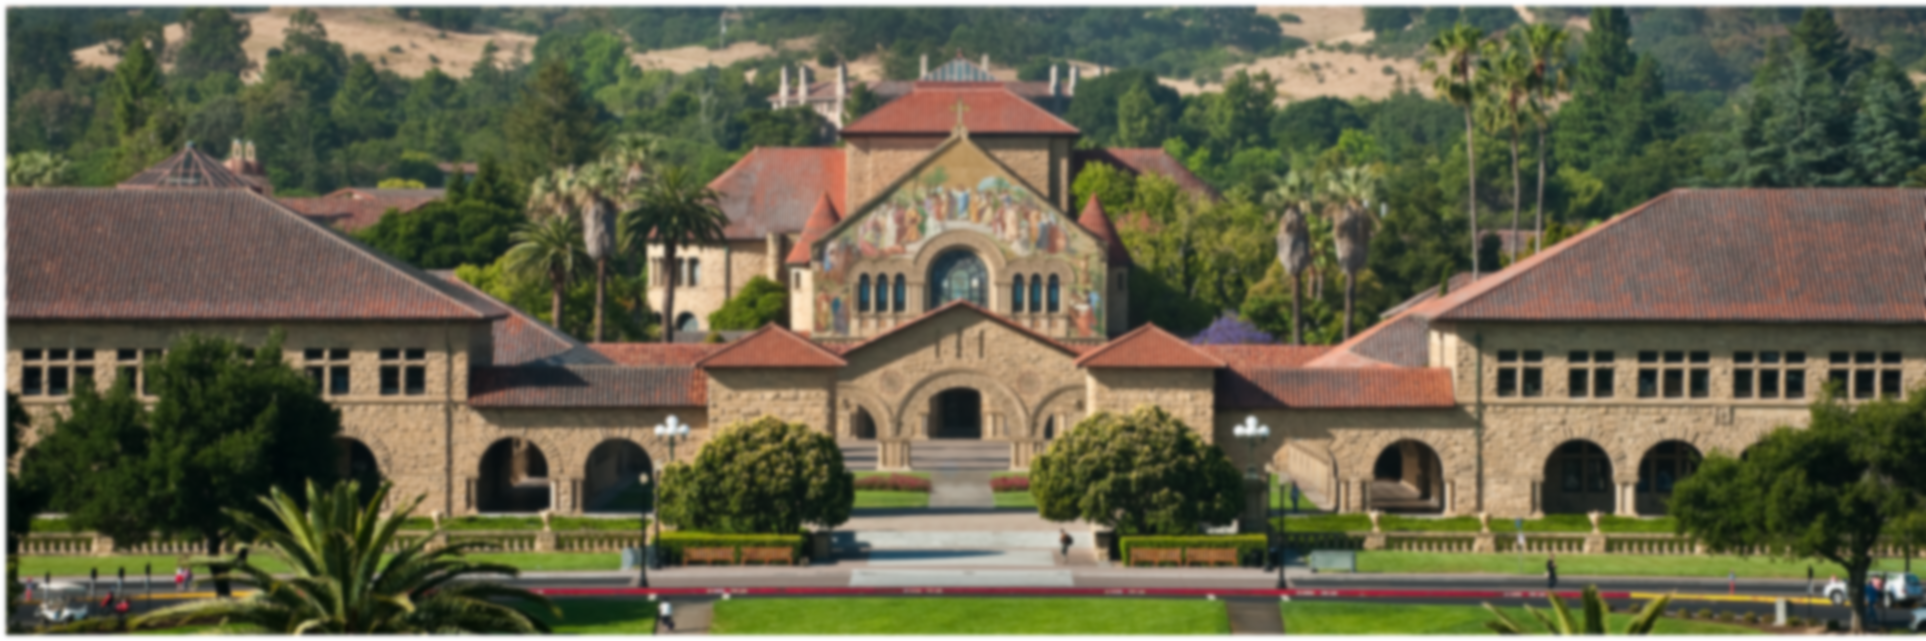 A picture of the Stanford Quad